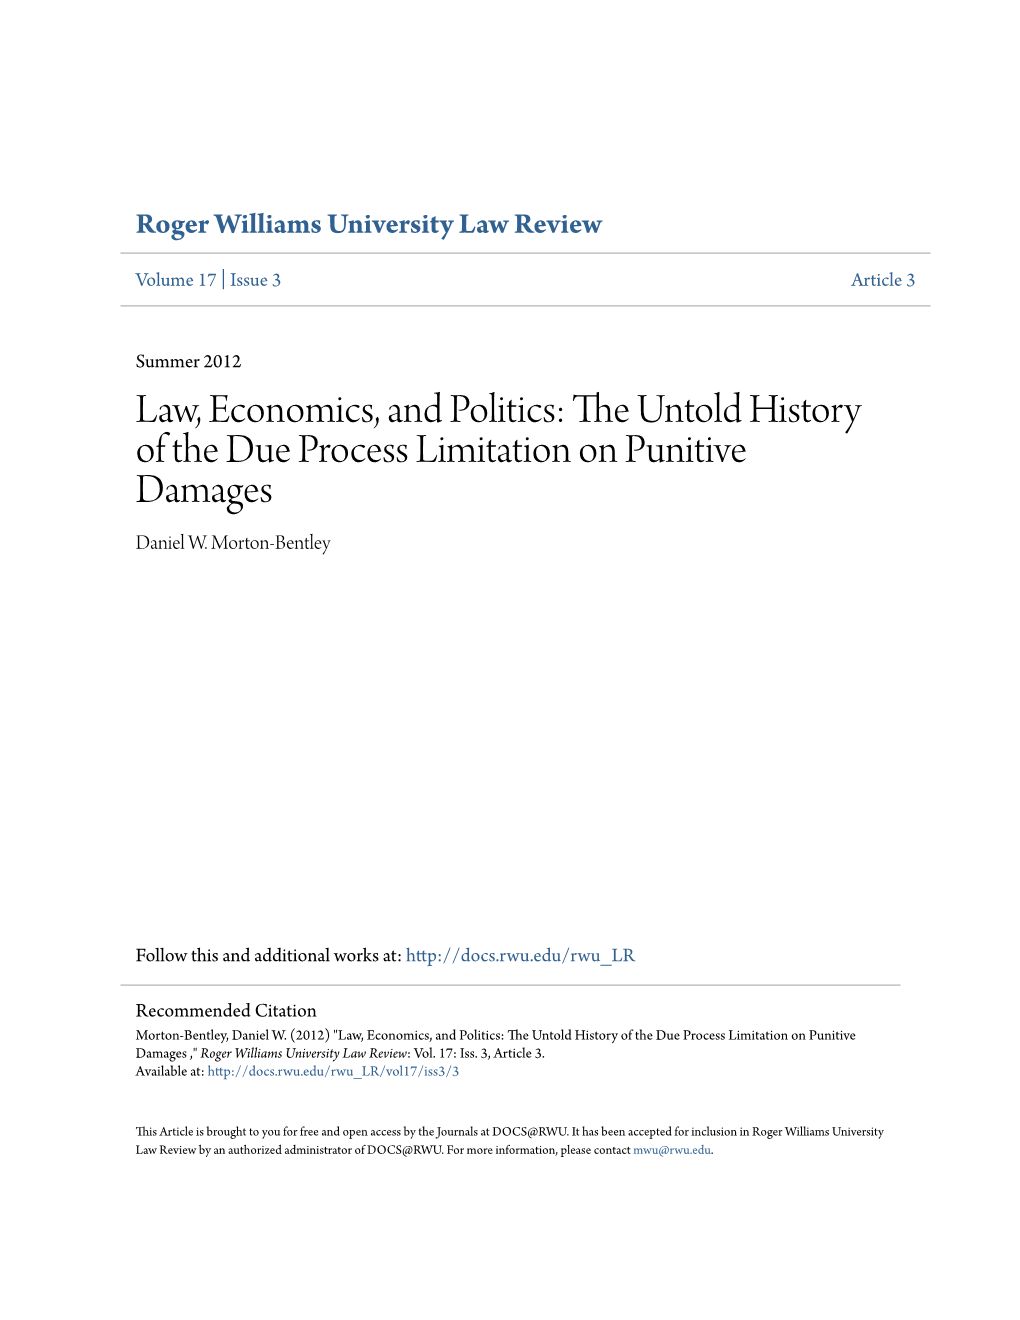 Law, Economics, and Politics: the Untold History of the Due Process